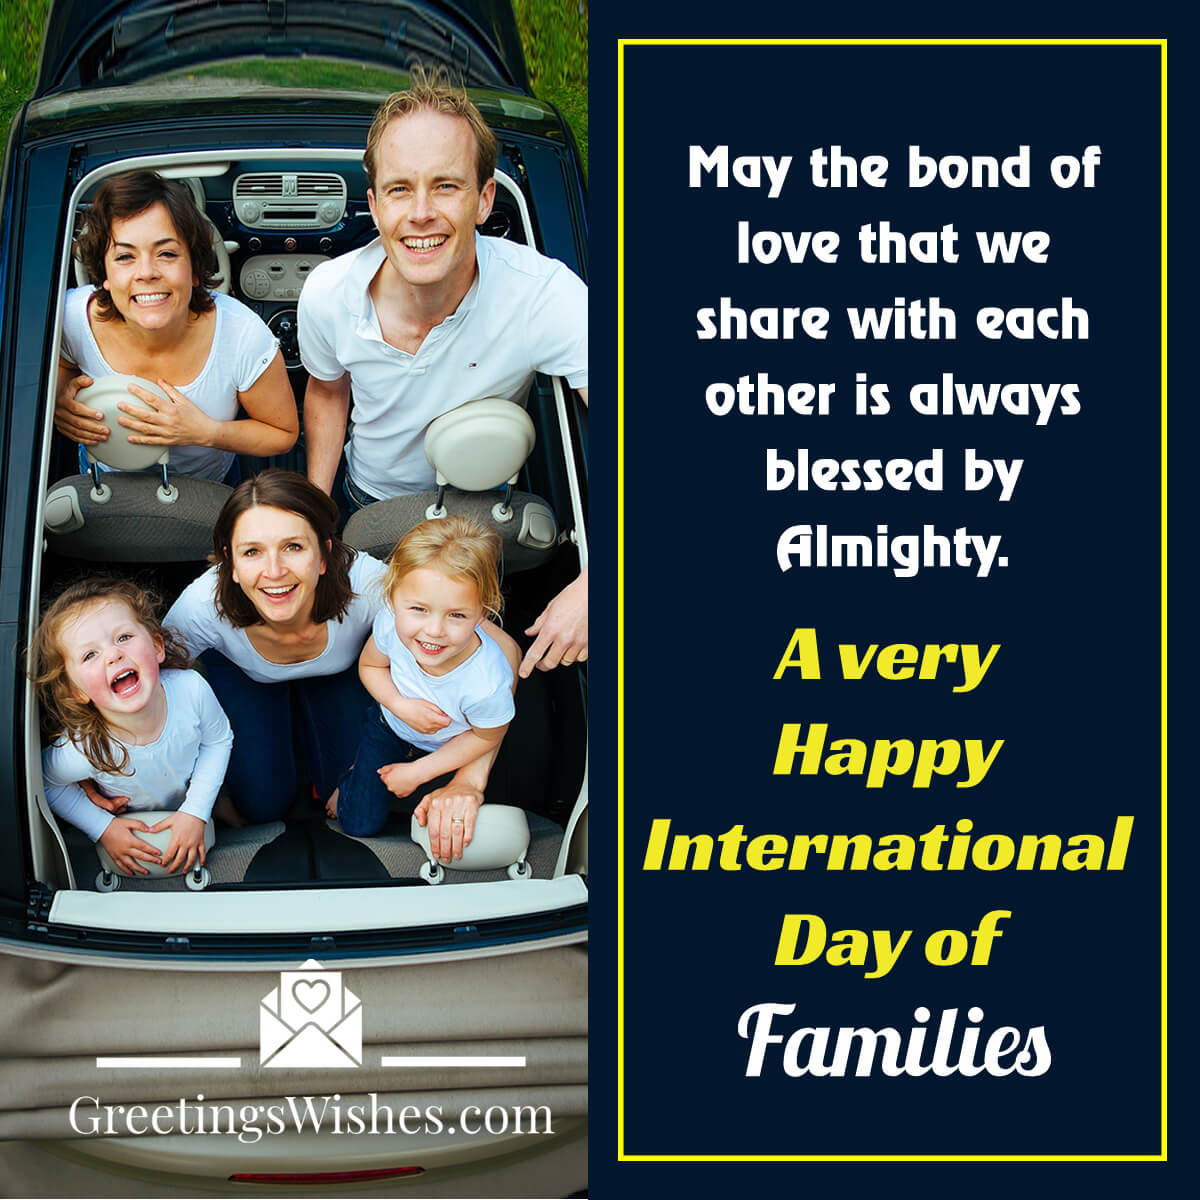 Family Day Greetings